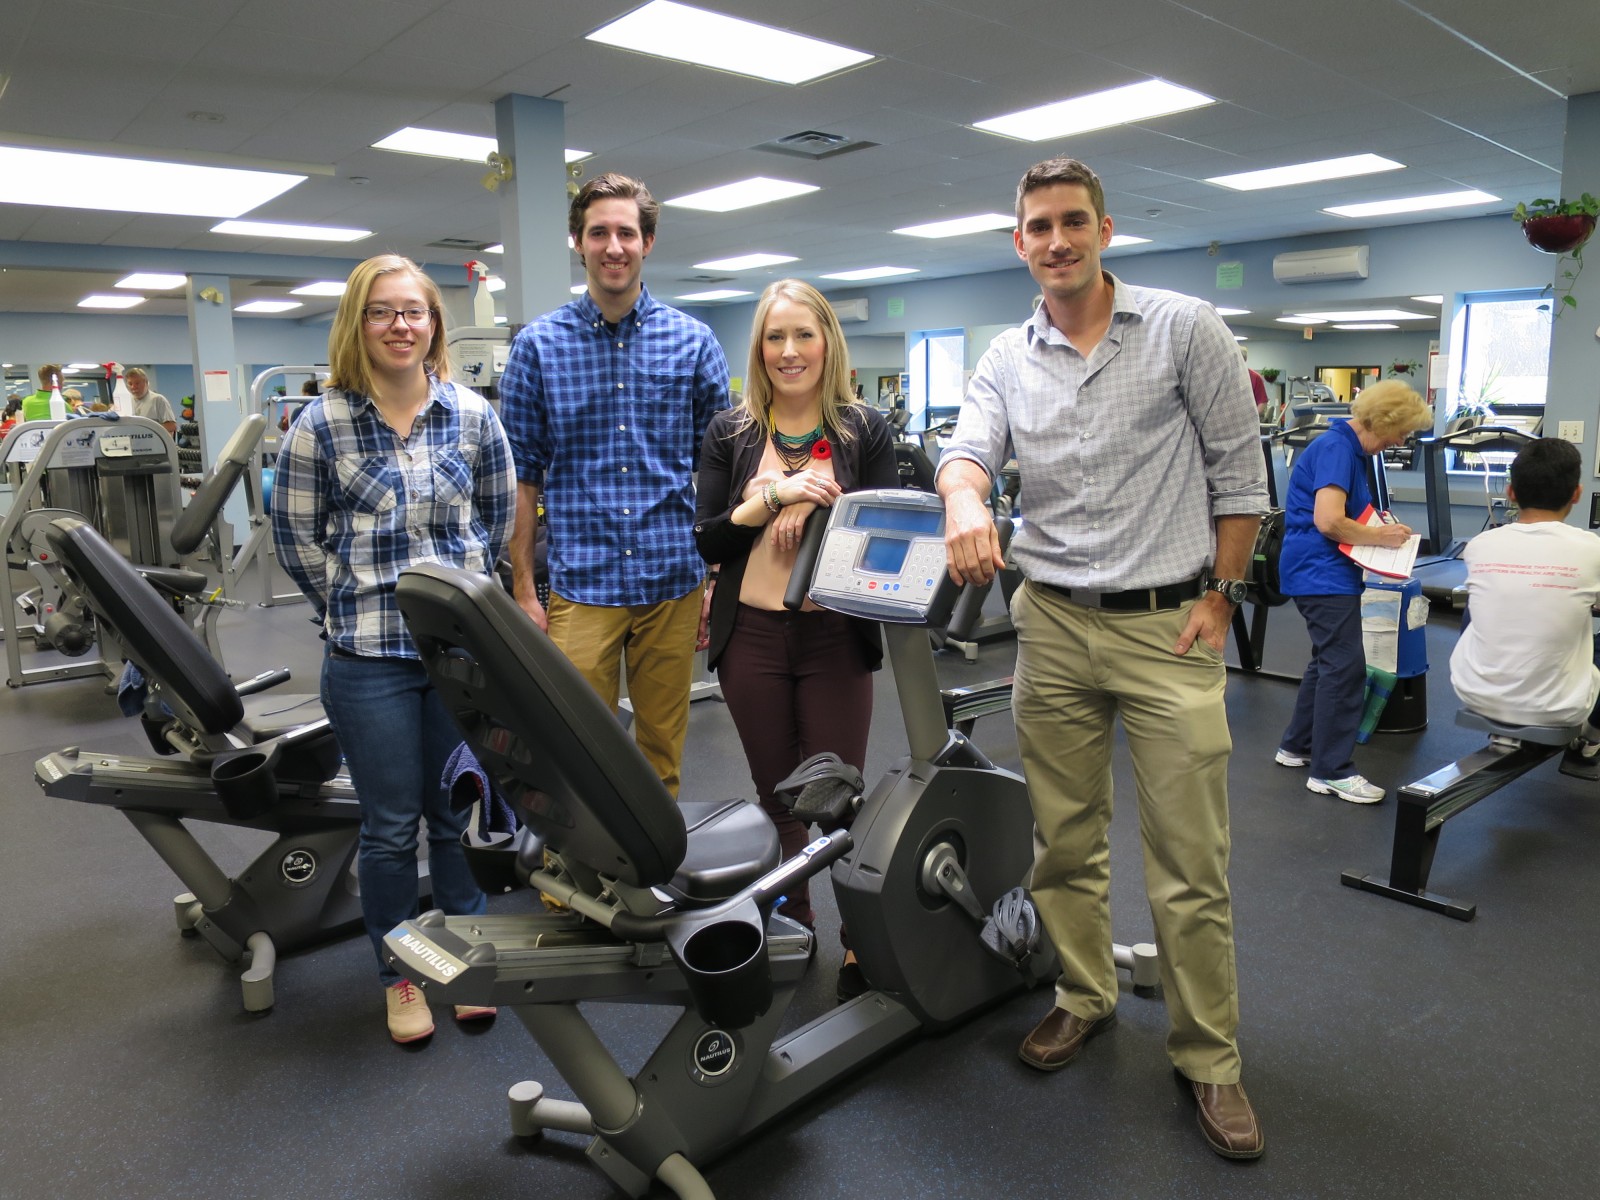 Students in front of an exercise machine